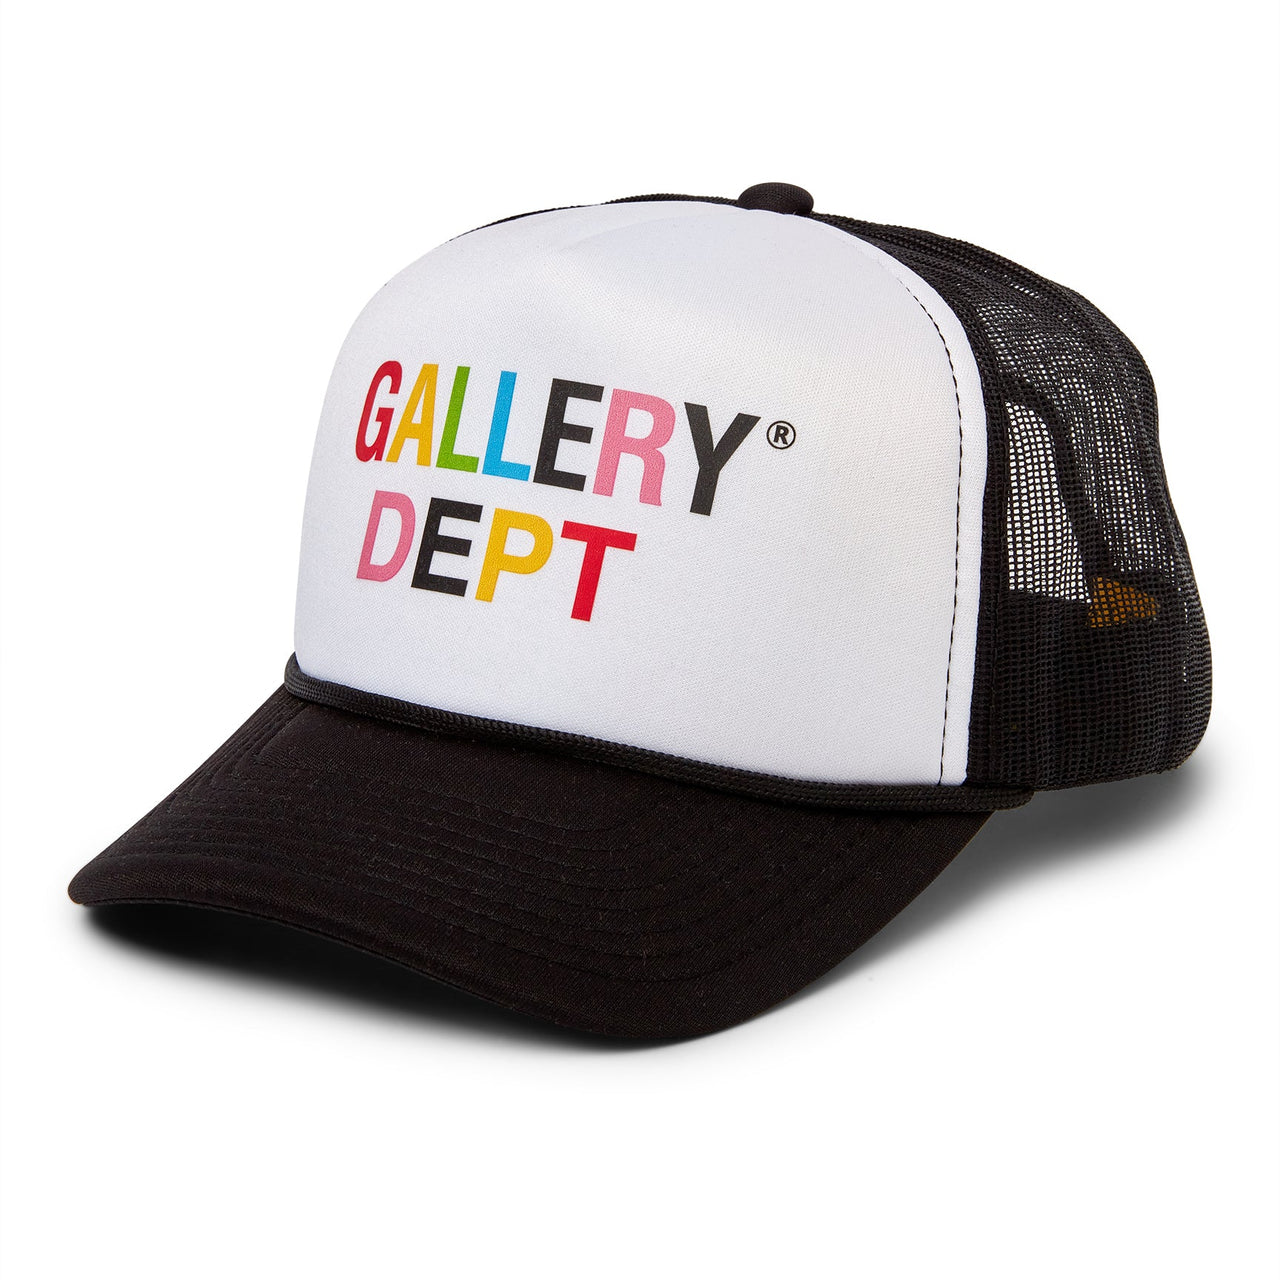 Gallery Dept. trucker restock! All available now @suplexsneakers 533 South  Street, Phila PA 19147. DM if interested or need shipped.